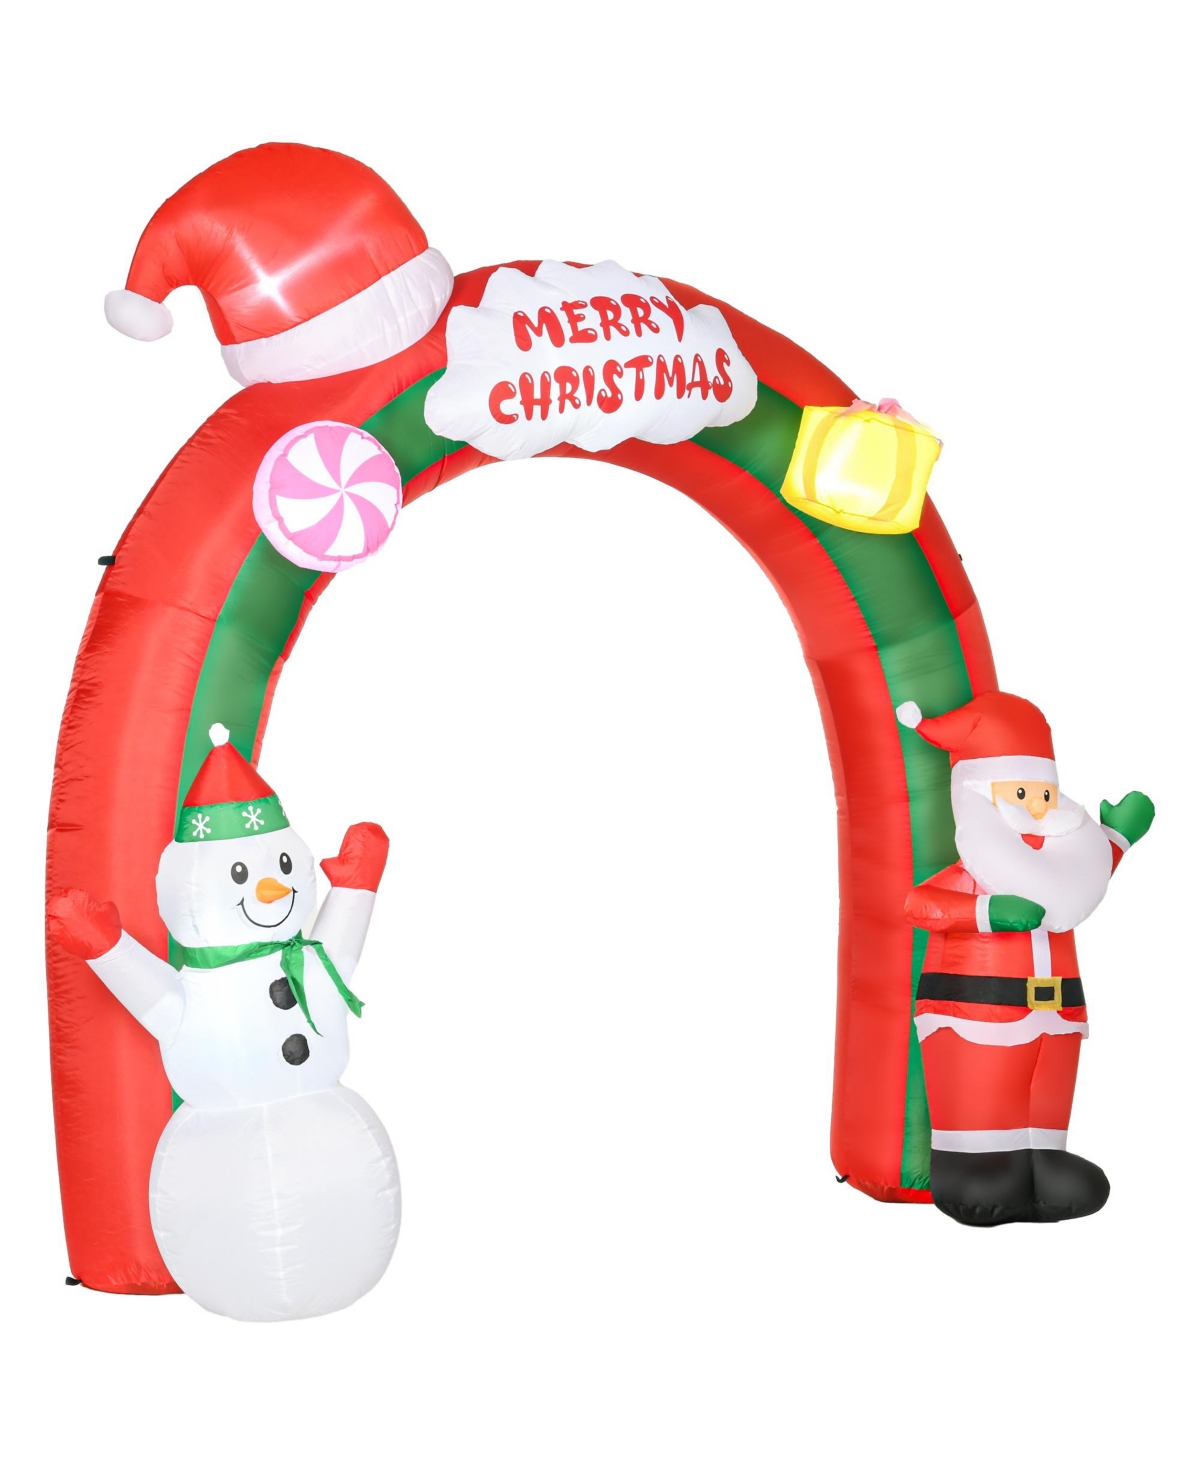 106.25" Giant Christmas Inflatables Archway with Santa for Yard - Multi-colored